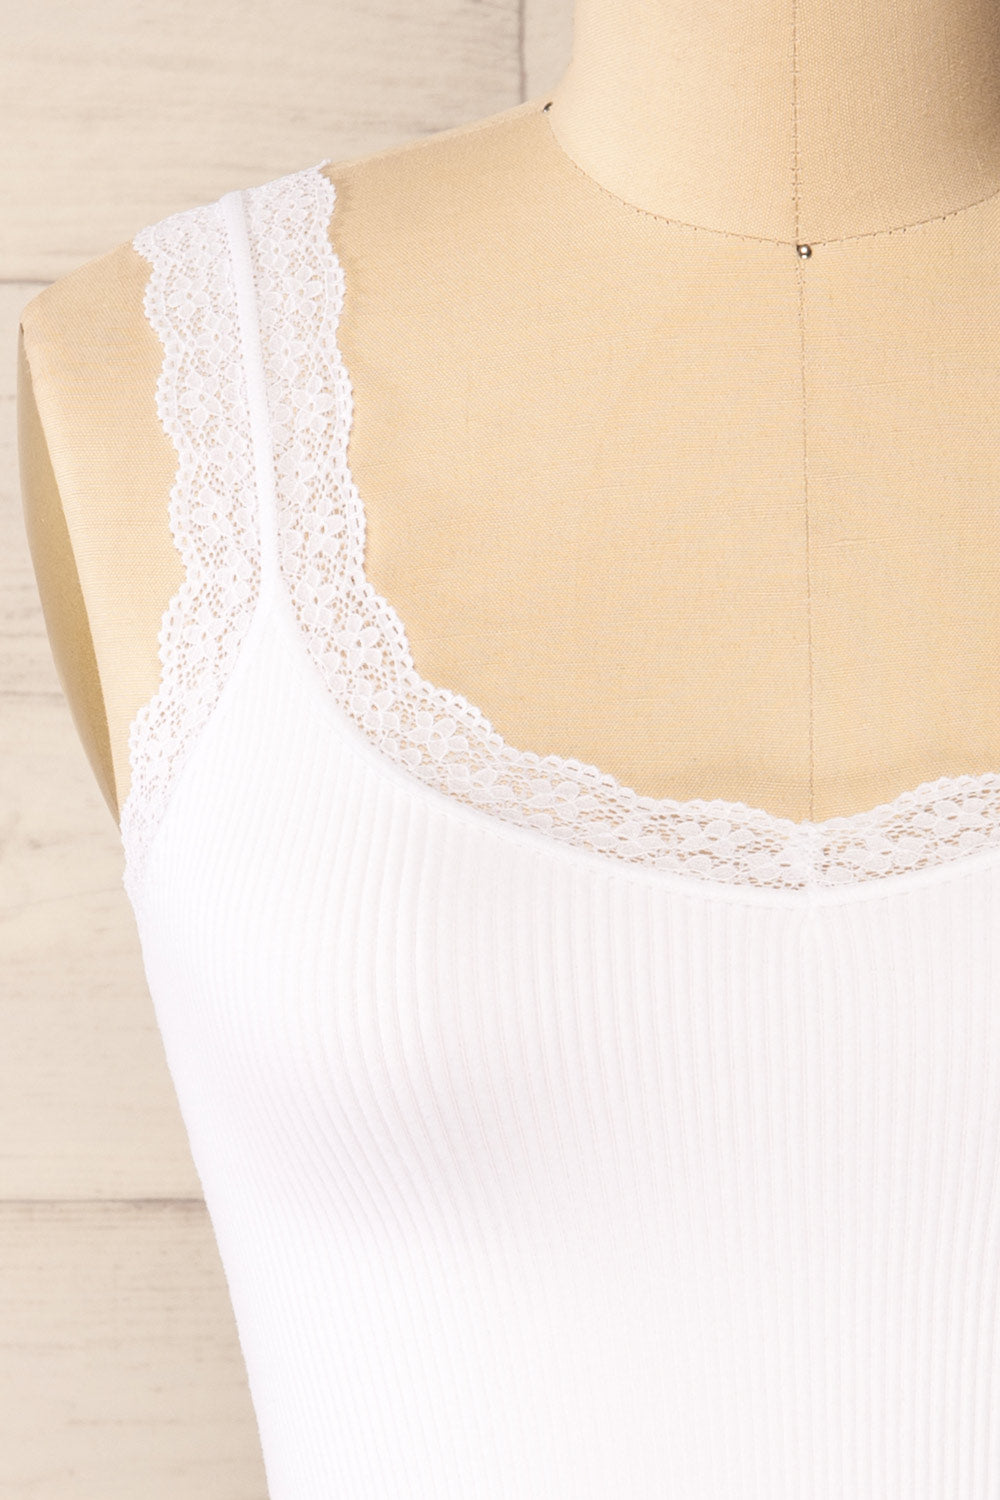 Somensac White Ribbed Camisole w/ Lace Trim | Boutique 1861 frotn close-up